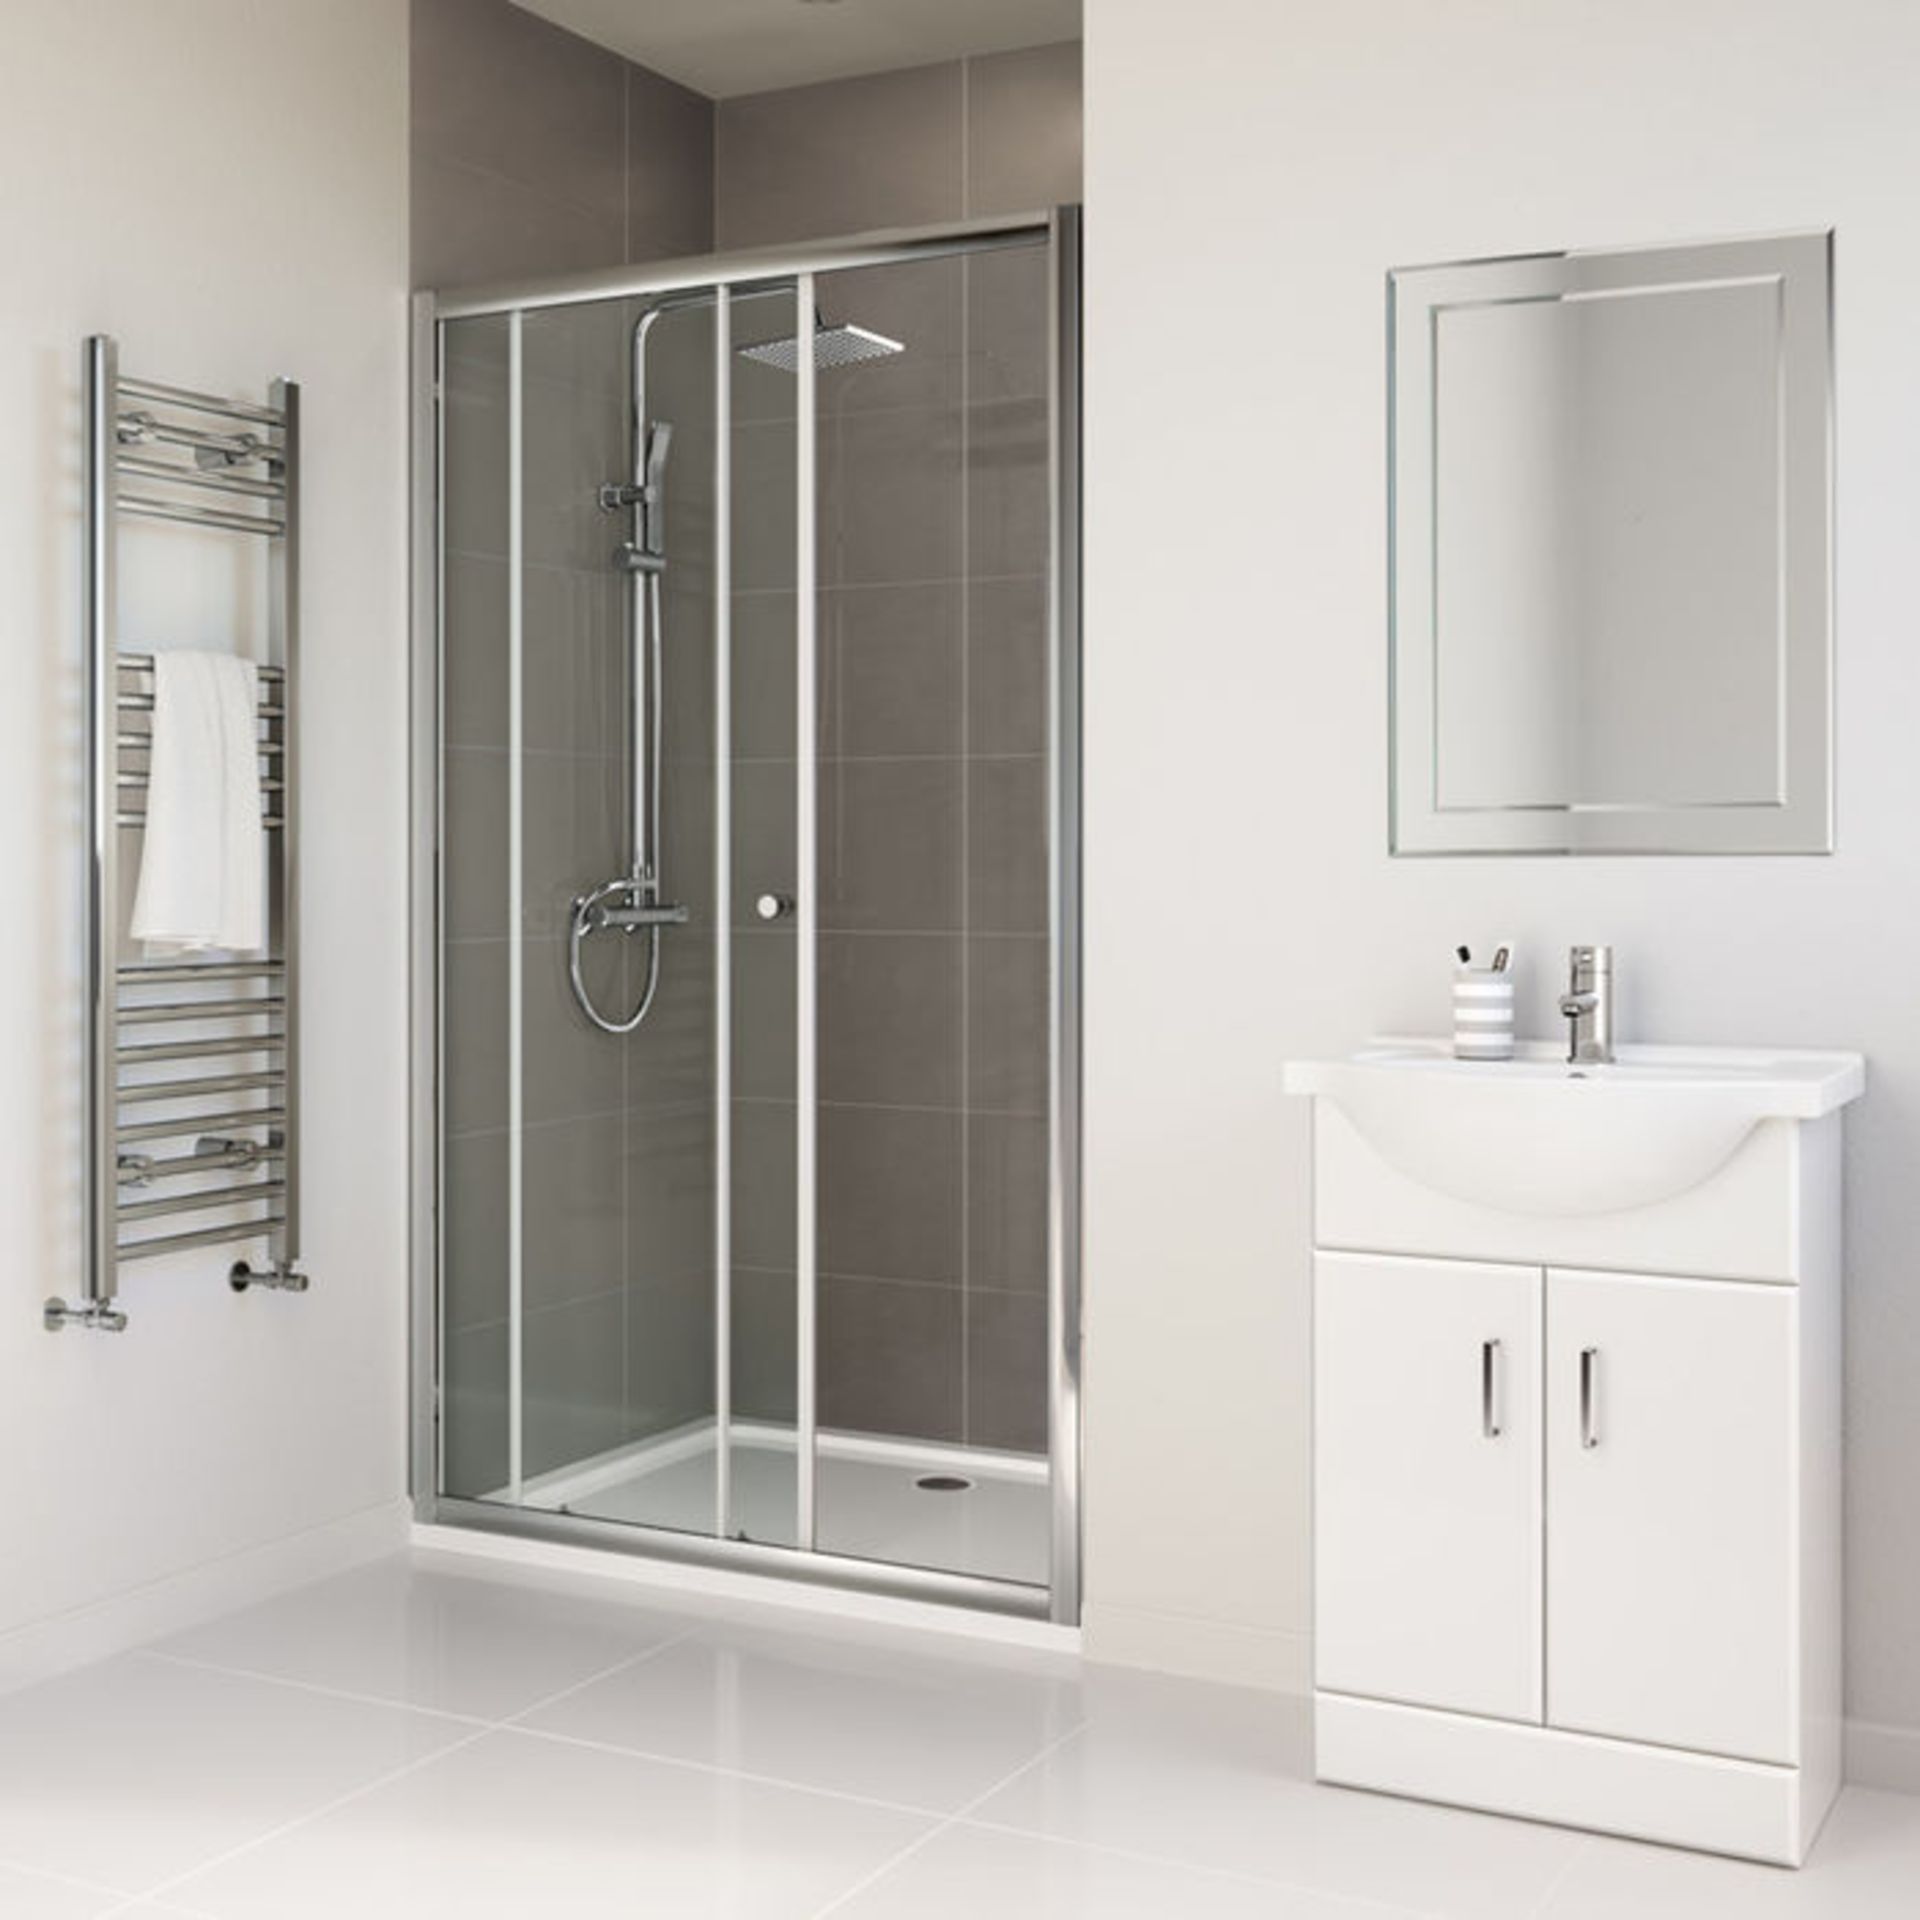 (PO75) 1000mm - Elements Sliding Shower Door. RRP £299.99.4mm Safety GlassFully waterproof tested - Image 3 of 3